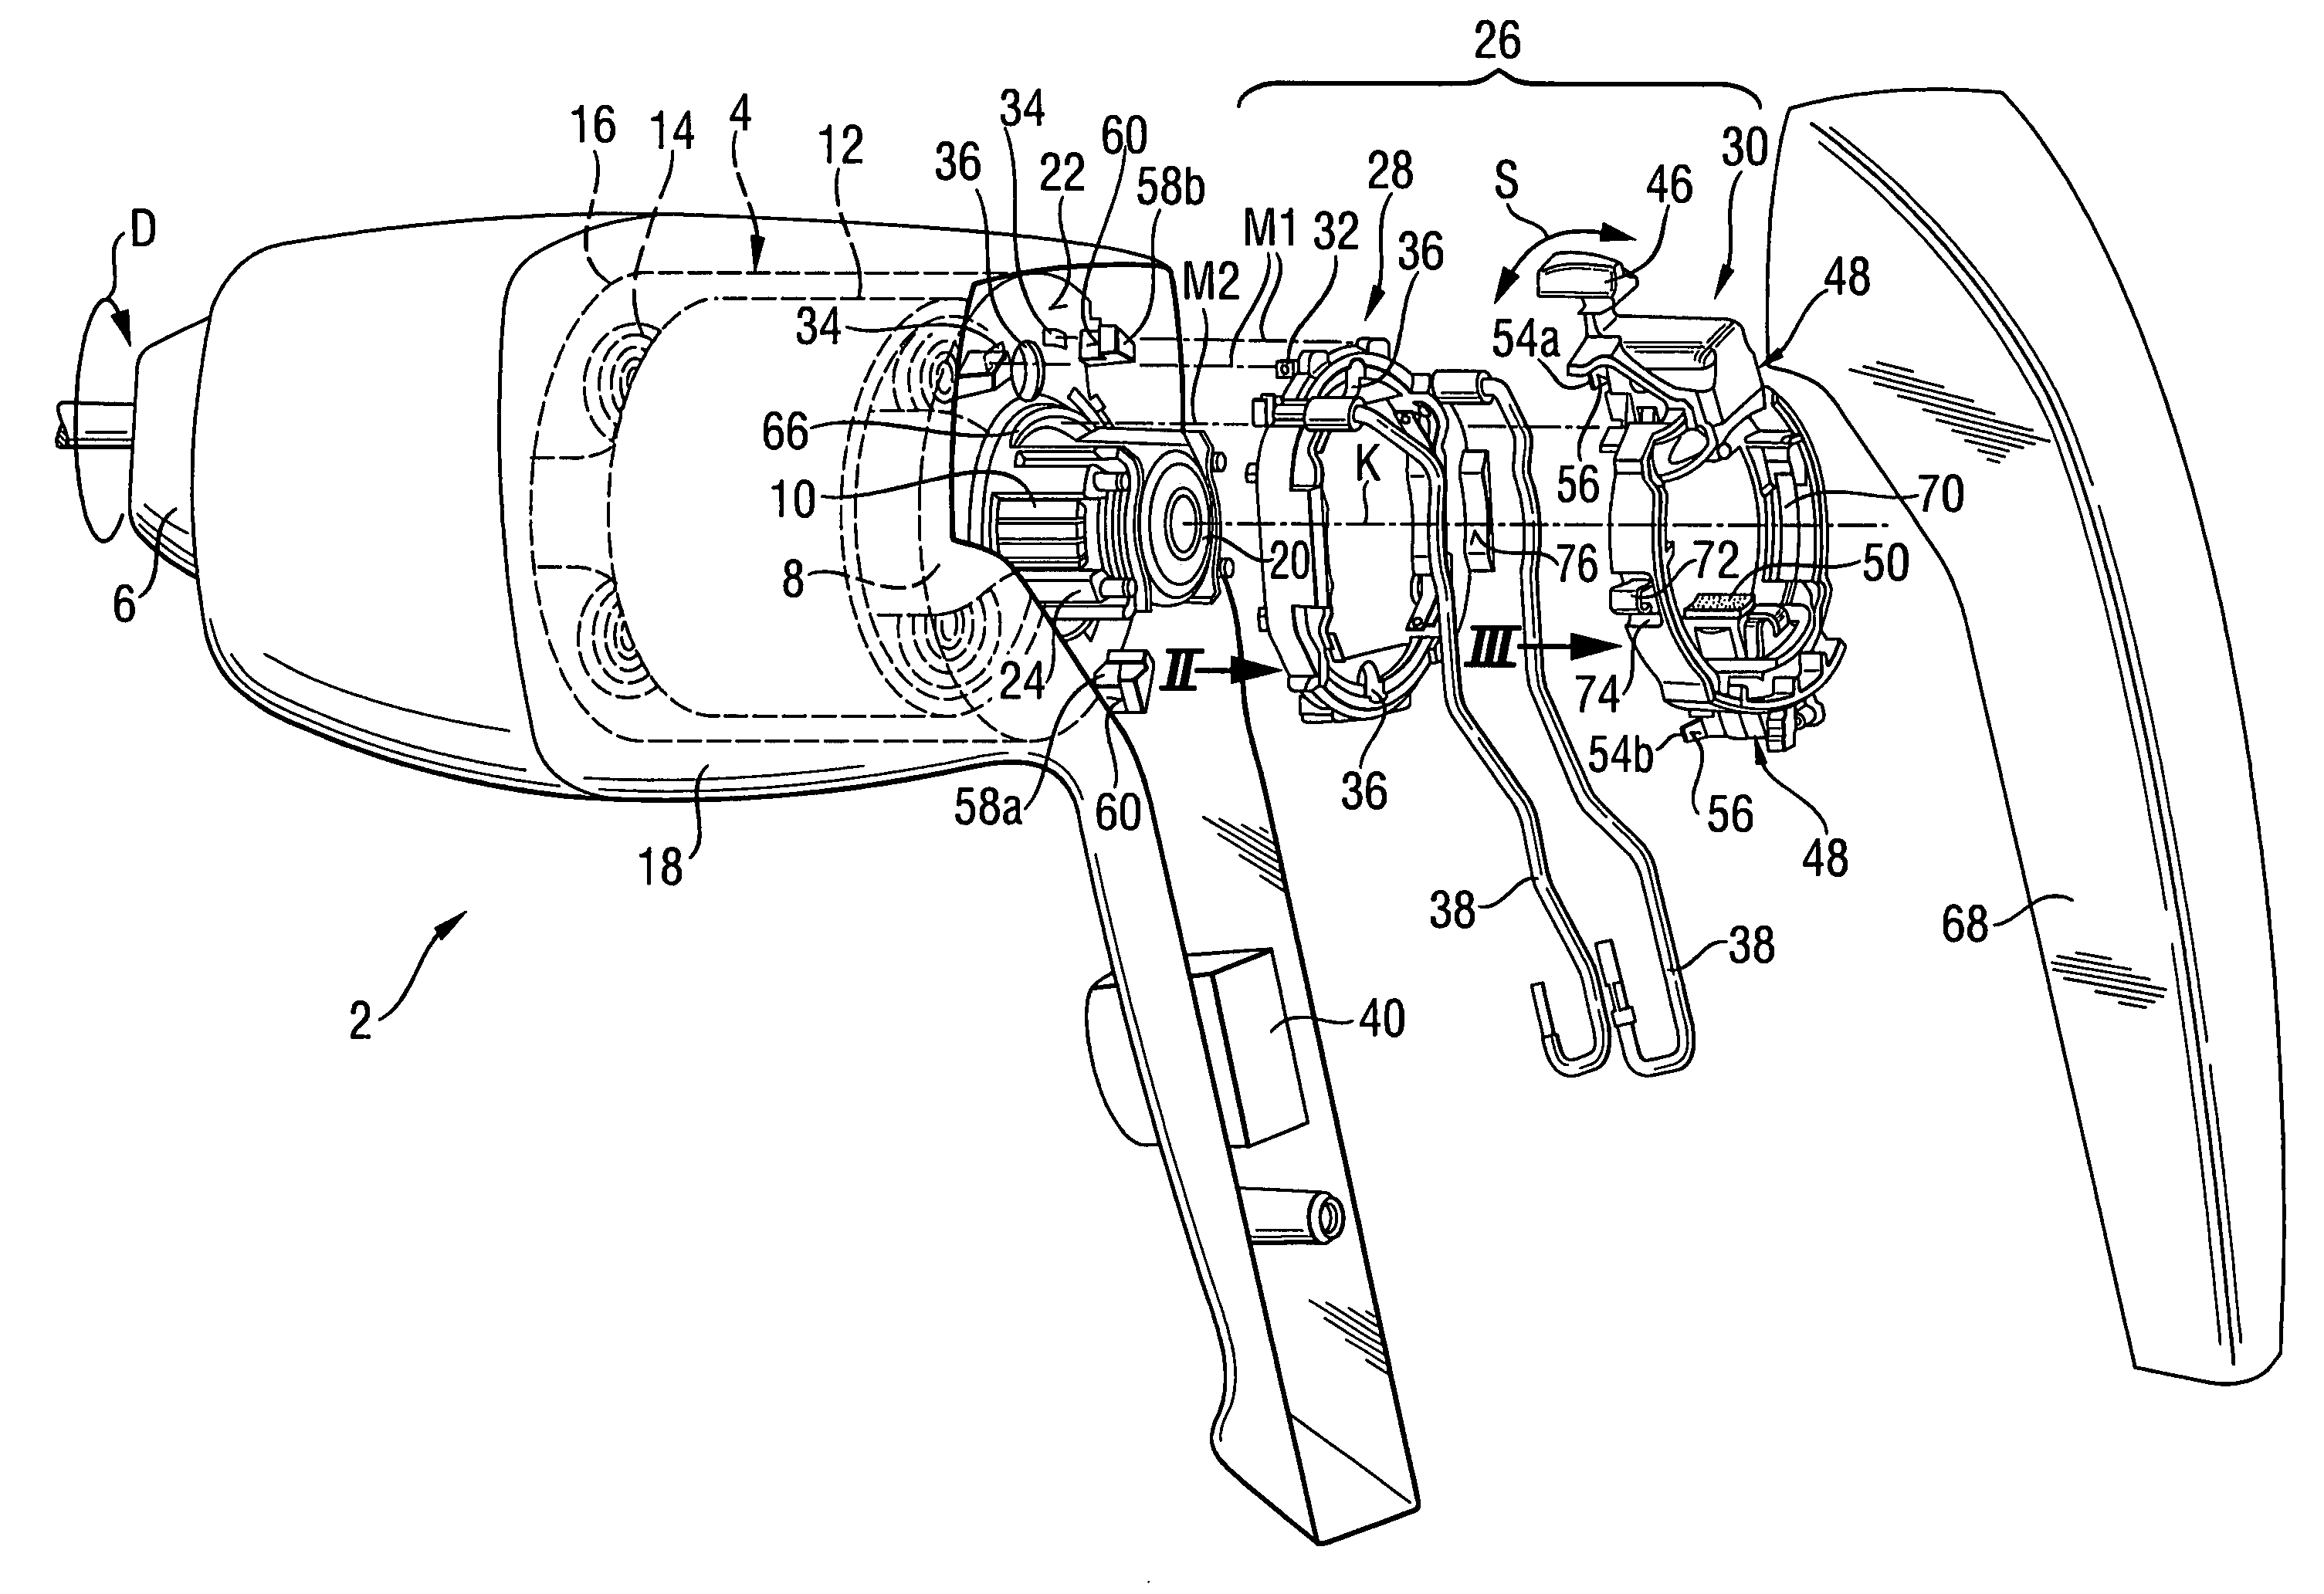 Device for reversing rotational direction of a motor